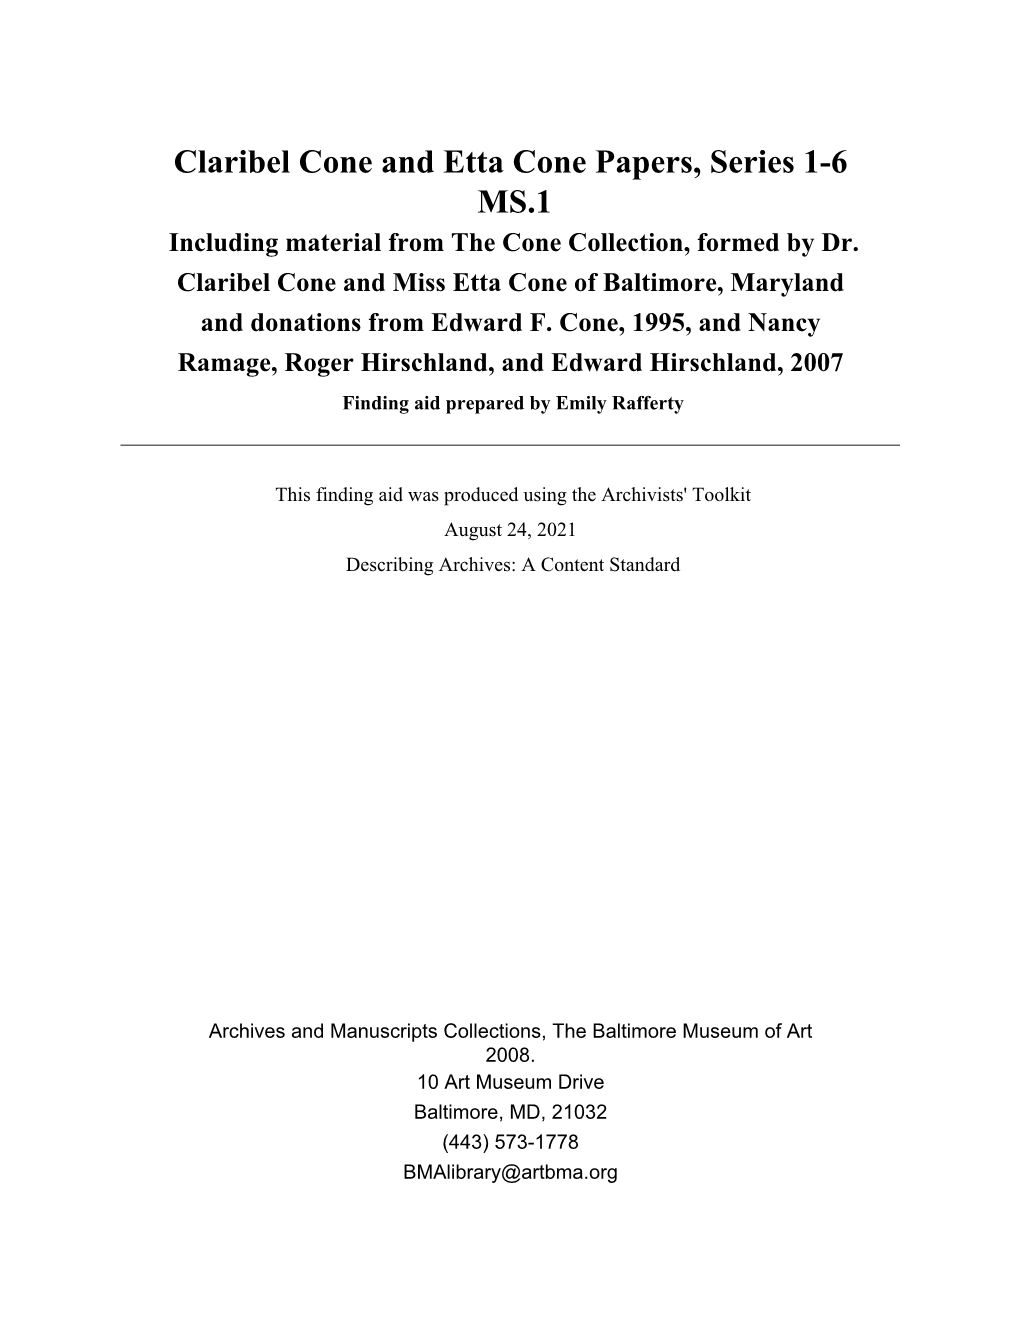 Claribel Cone and Etta Cone Papers, Series 1-6 MS.1 Including Material from the Cone Collection, Formed by Dr